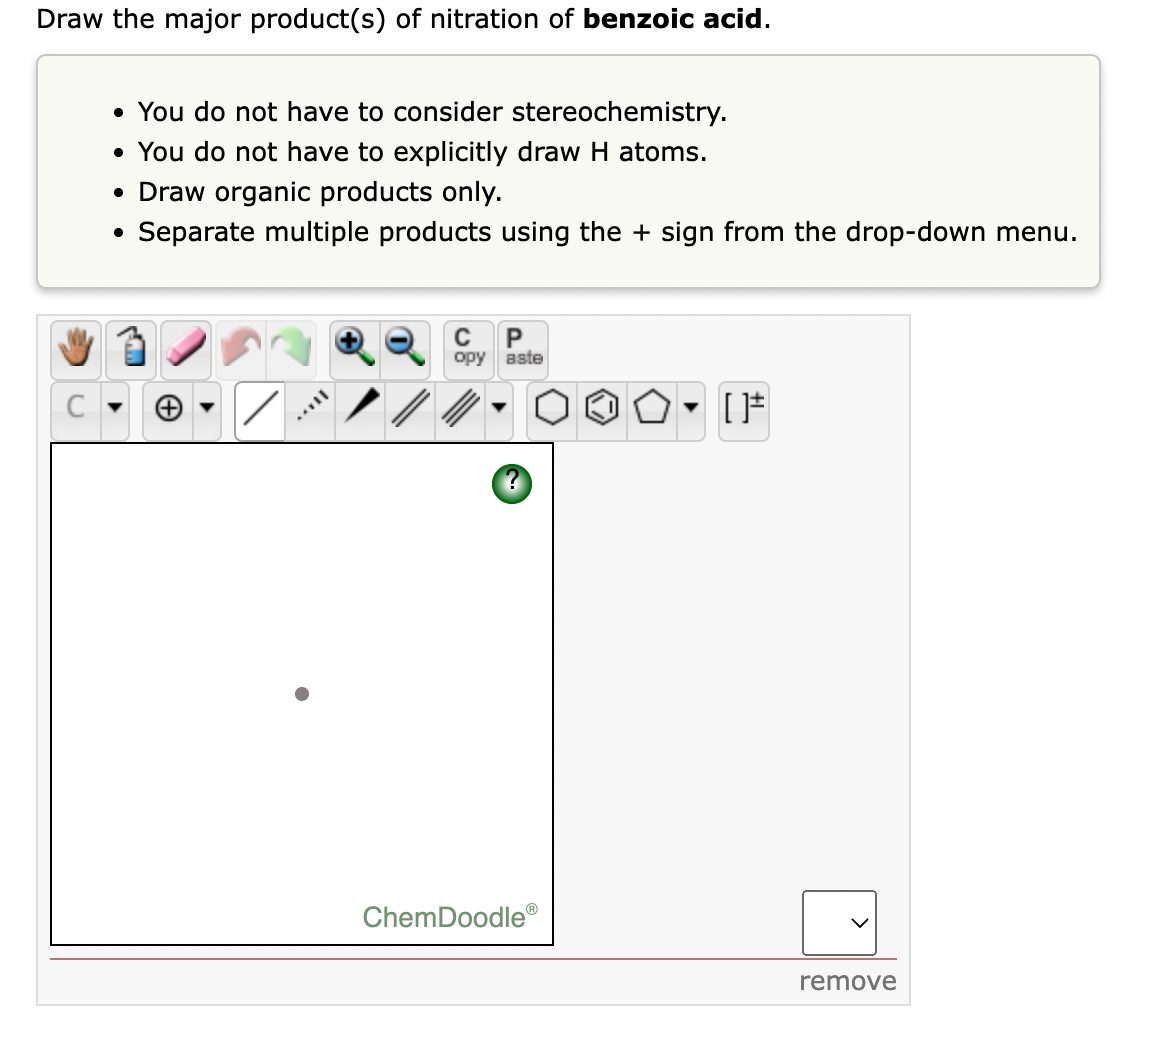 Draw the major product(s) of nitration of benzoic acid.
• You do not have to consider stereochemistry.
• You do not have to explicitly draw H atoms.
• Draw organic products only.
Separate multiple products using the + sign from the drop-down menu.
P
opy aste
C
ChemDoodle®
remove
